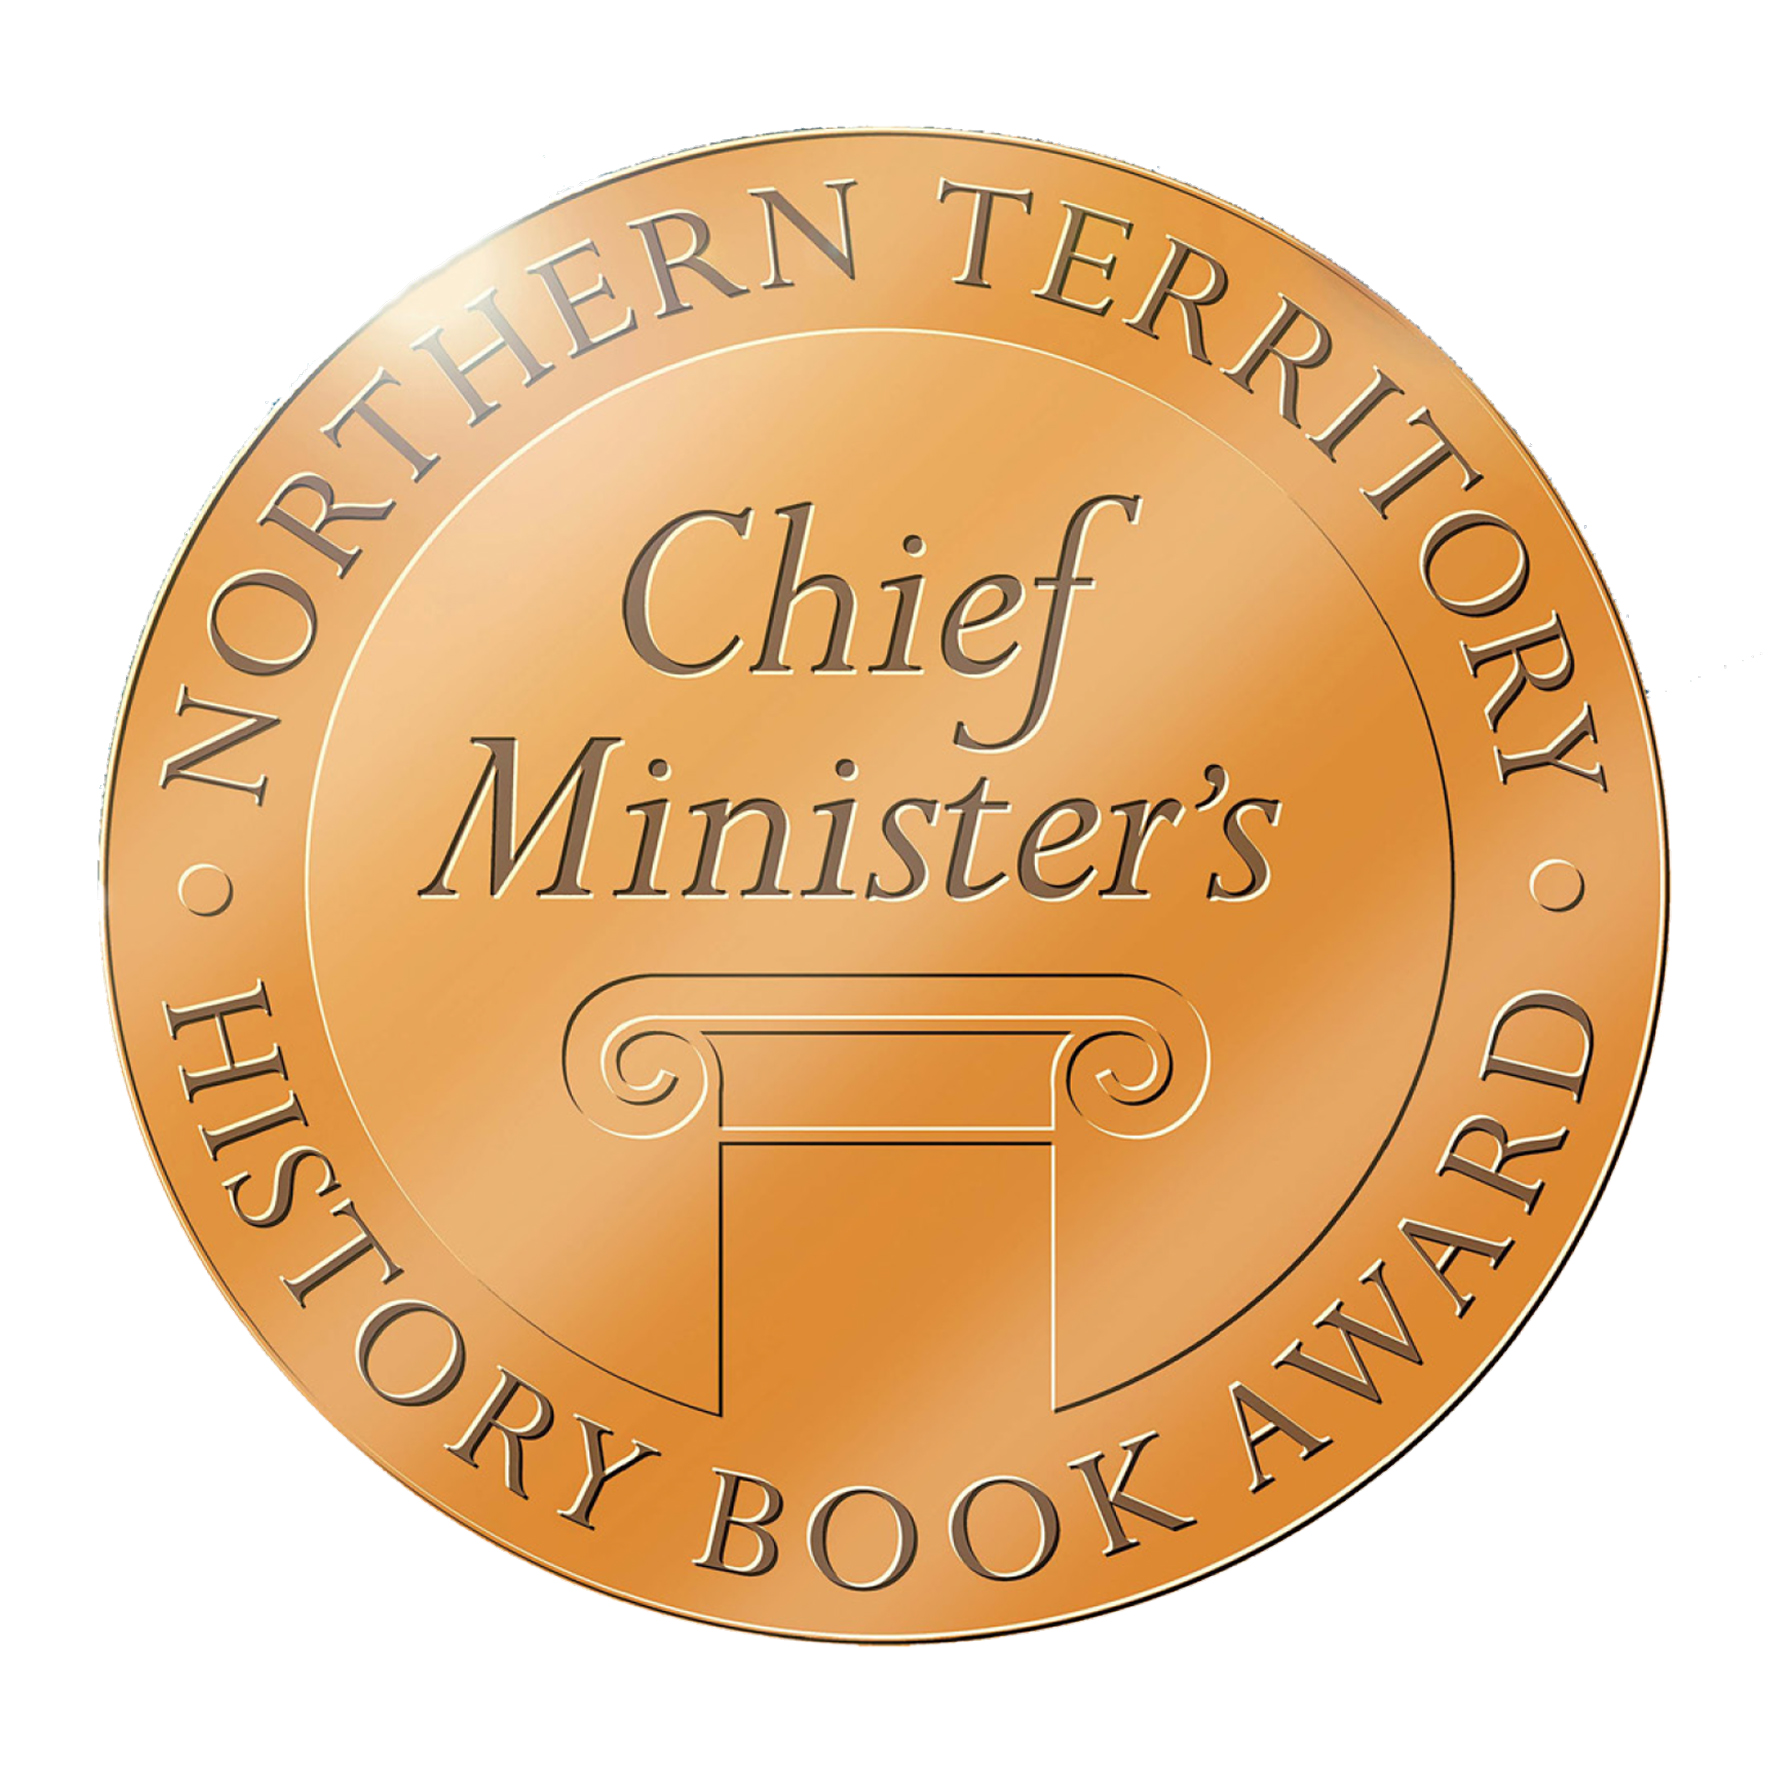 Chief Minister's Northern Territory Book Awards Logo